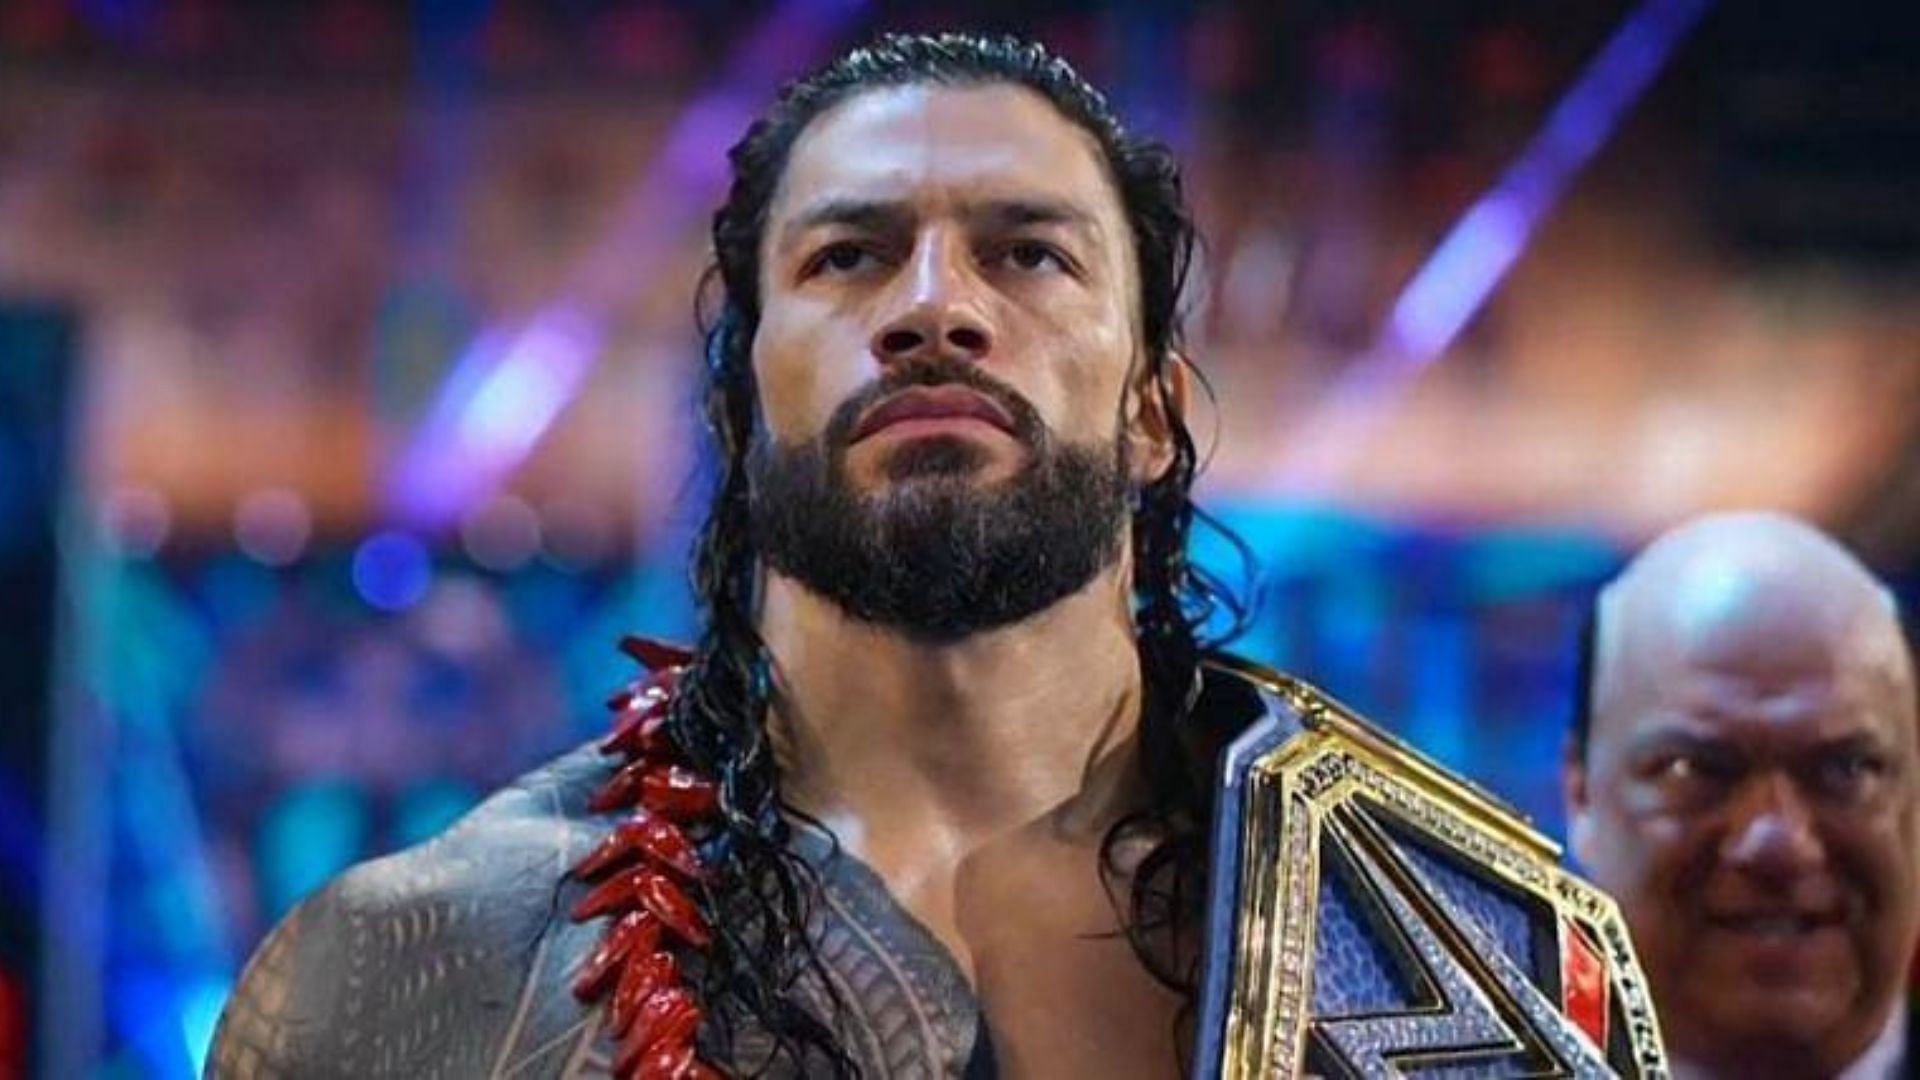 Which former WWE Champion could dethrone Roman Reigns?